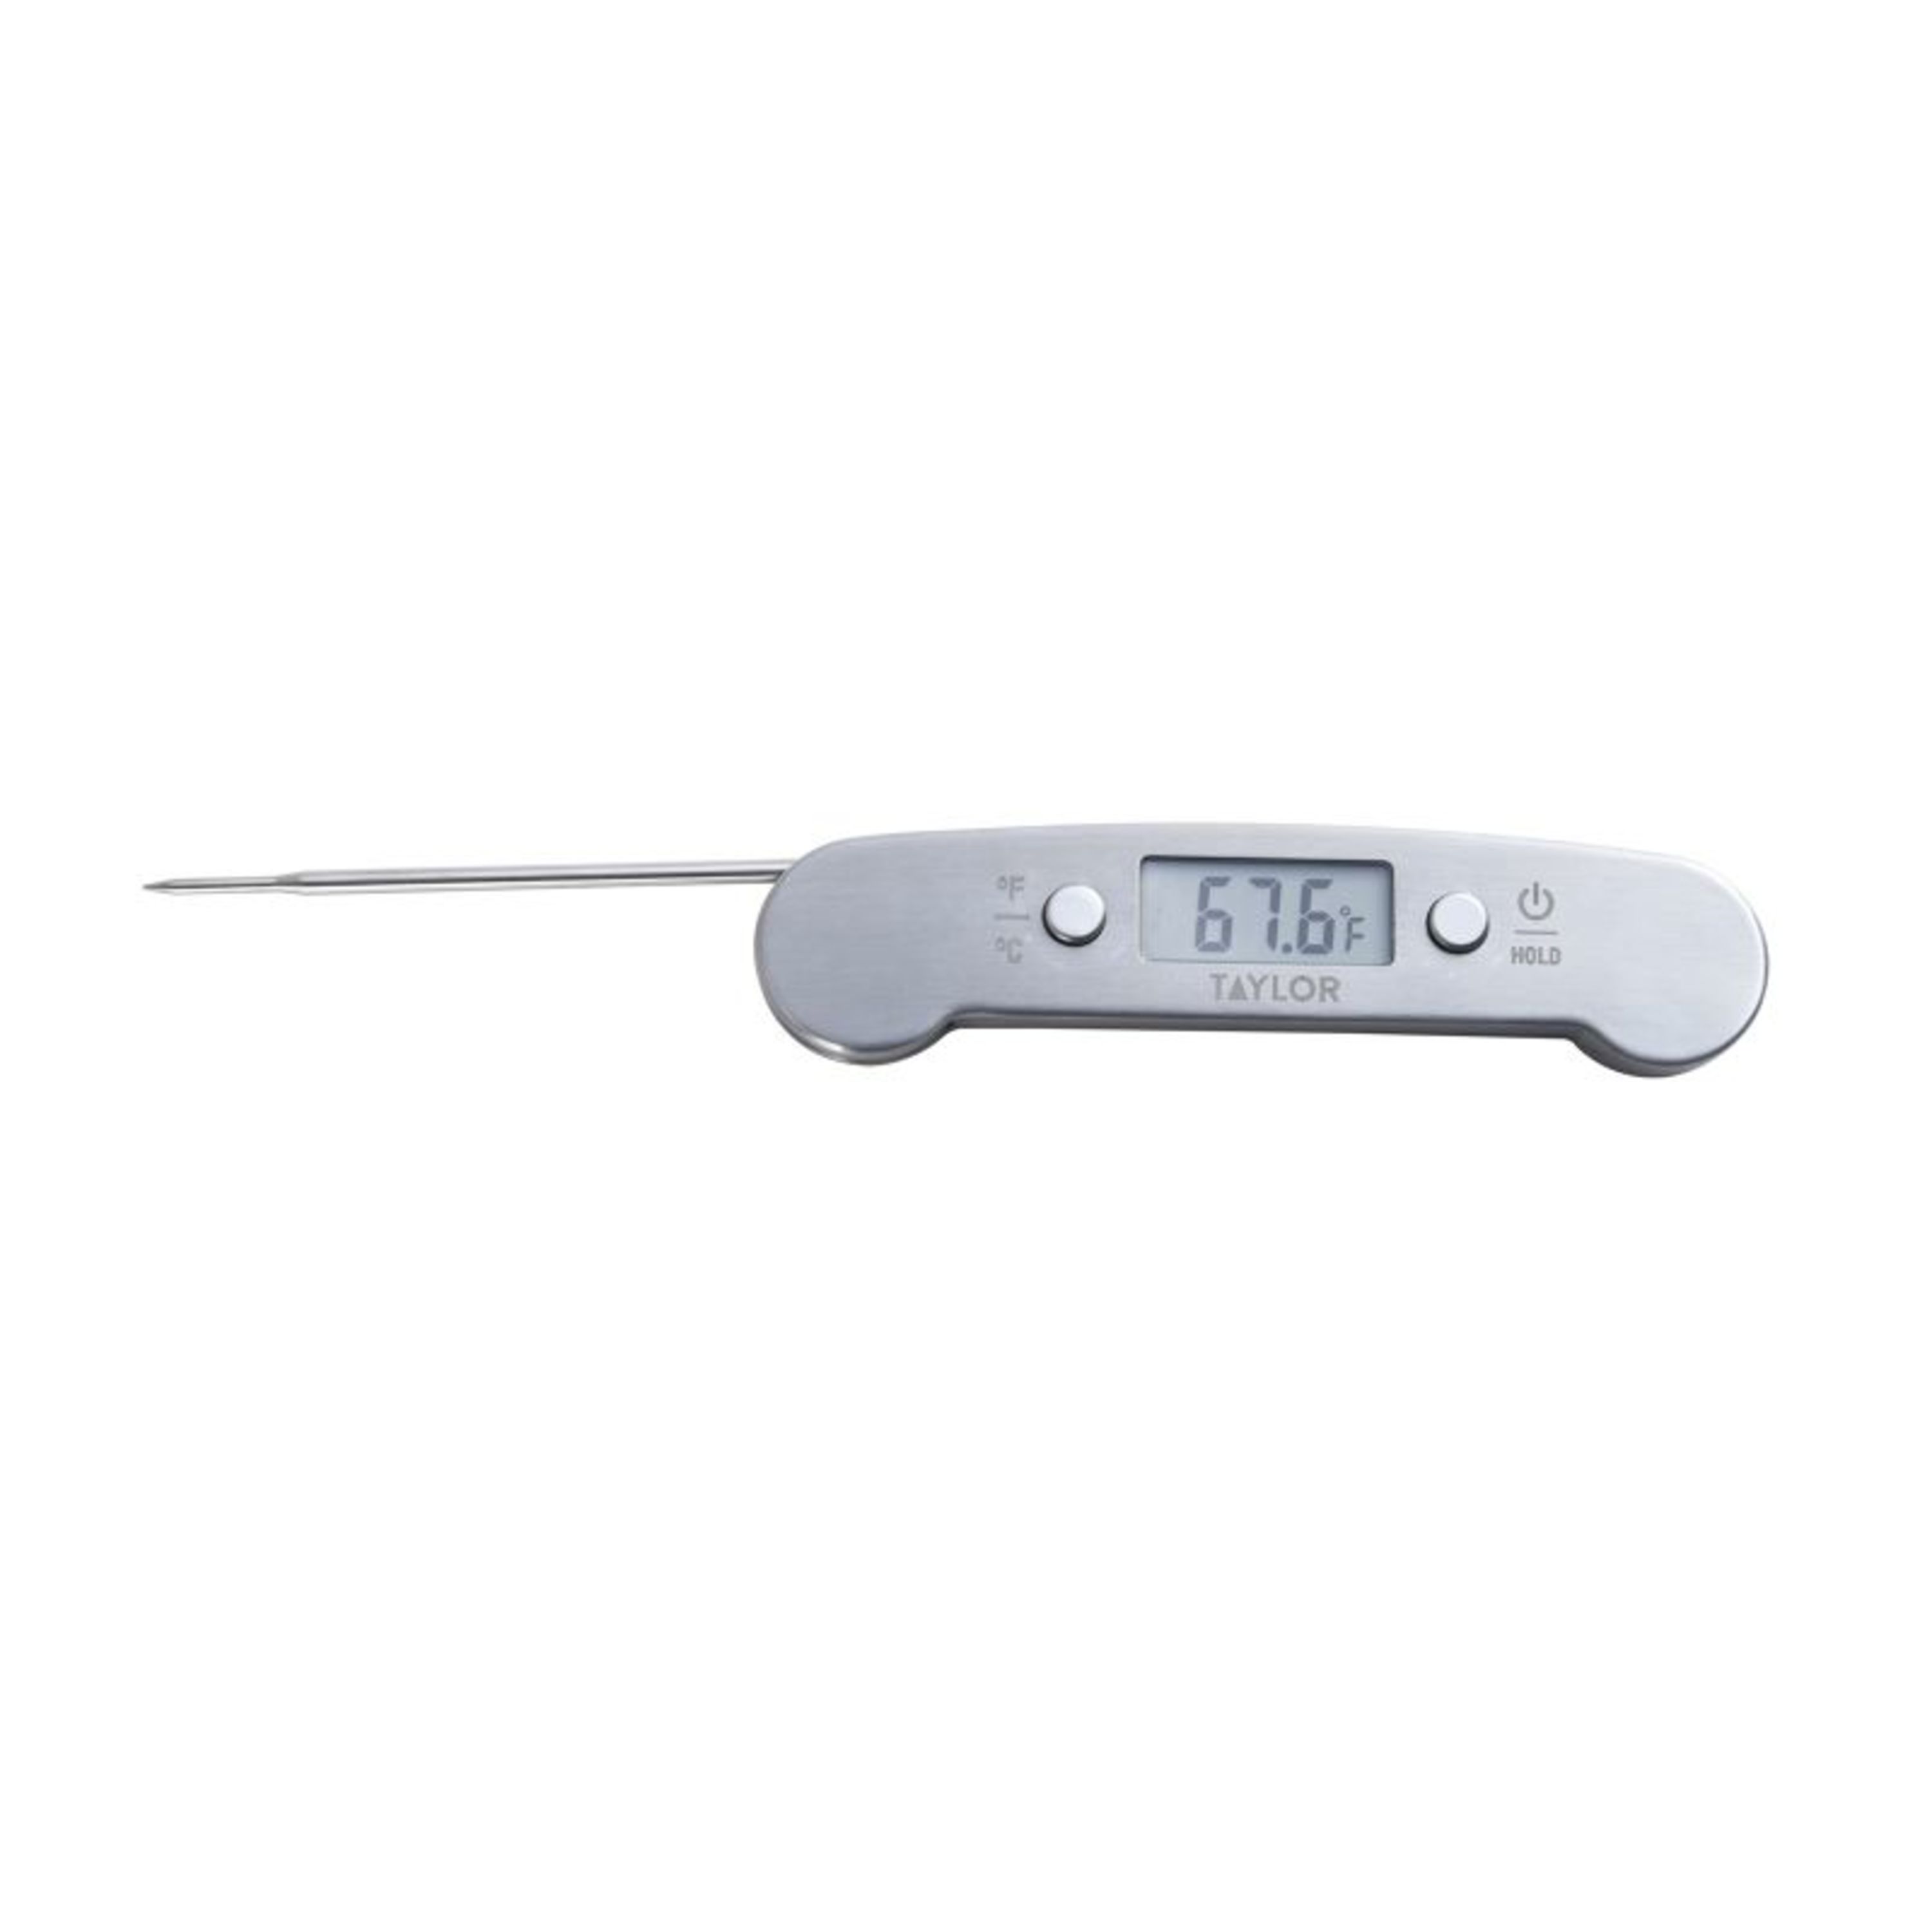 Talylor Pro Folding Pen Digital Thermometer Stainless Steel - image 5 of 9